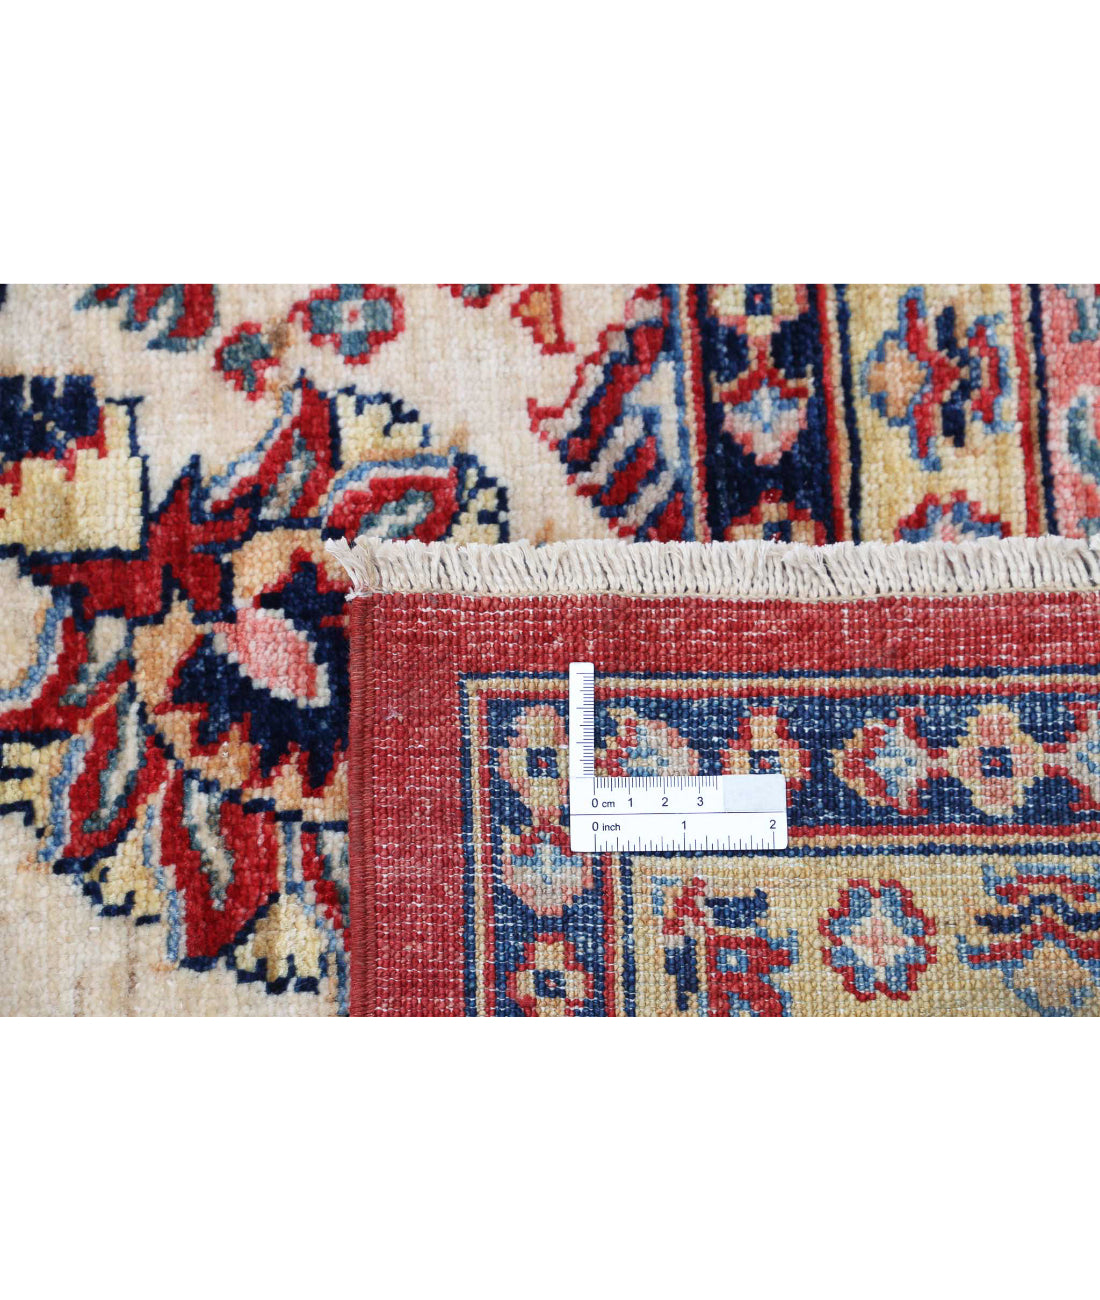 Heriz 14'2'' X 15'2'' Hand-Knotted Wool Rug 14'2'' x 15'2'' (425 X 455) / Red / Blue